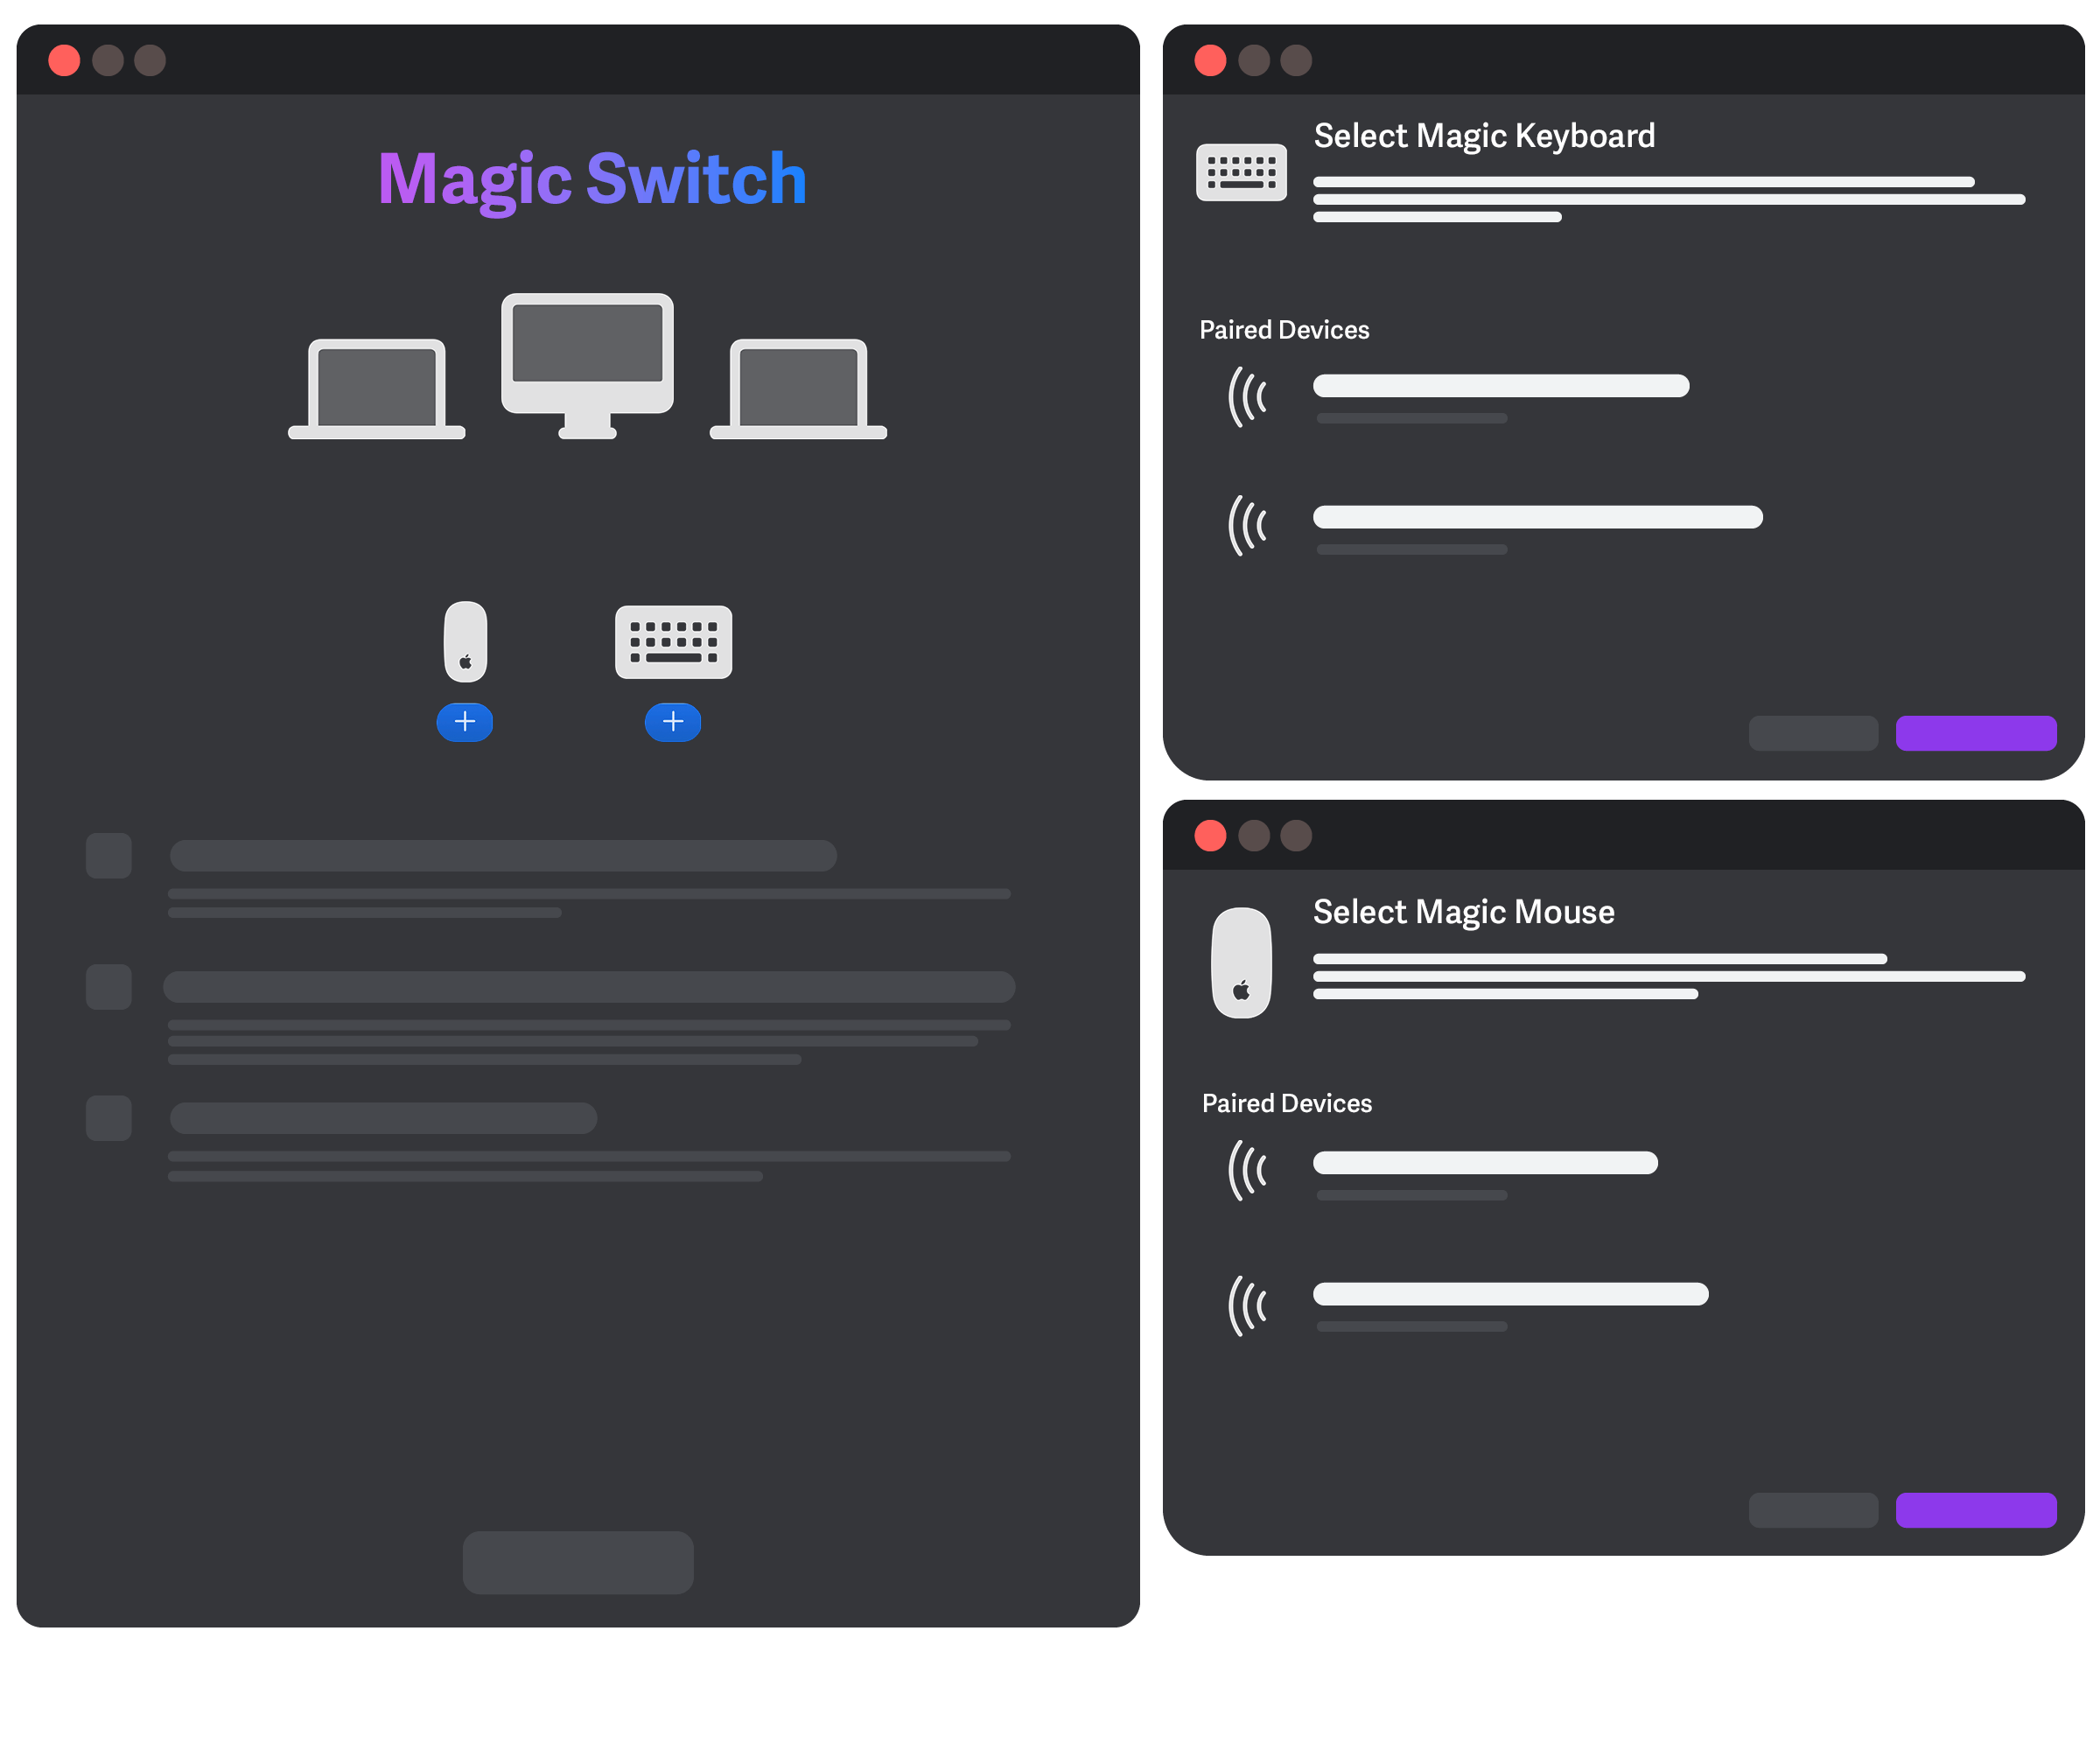 Set up Your Magic Keyboard and Magic Mouse